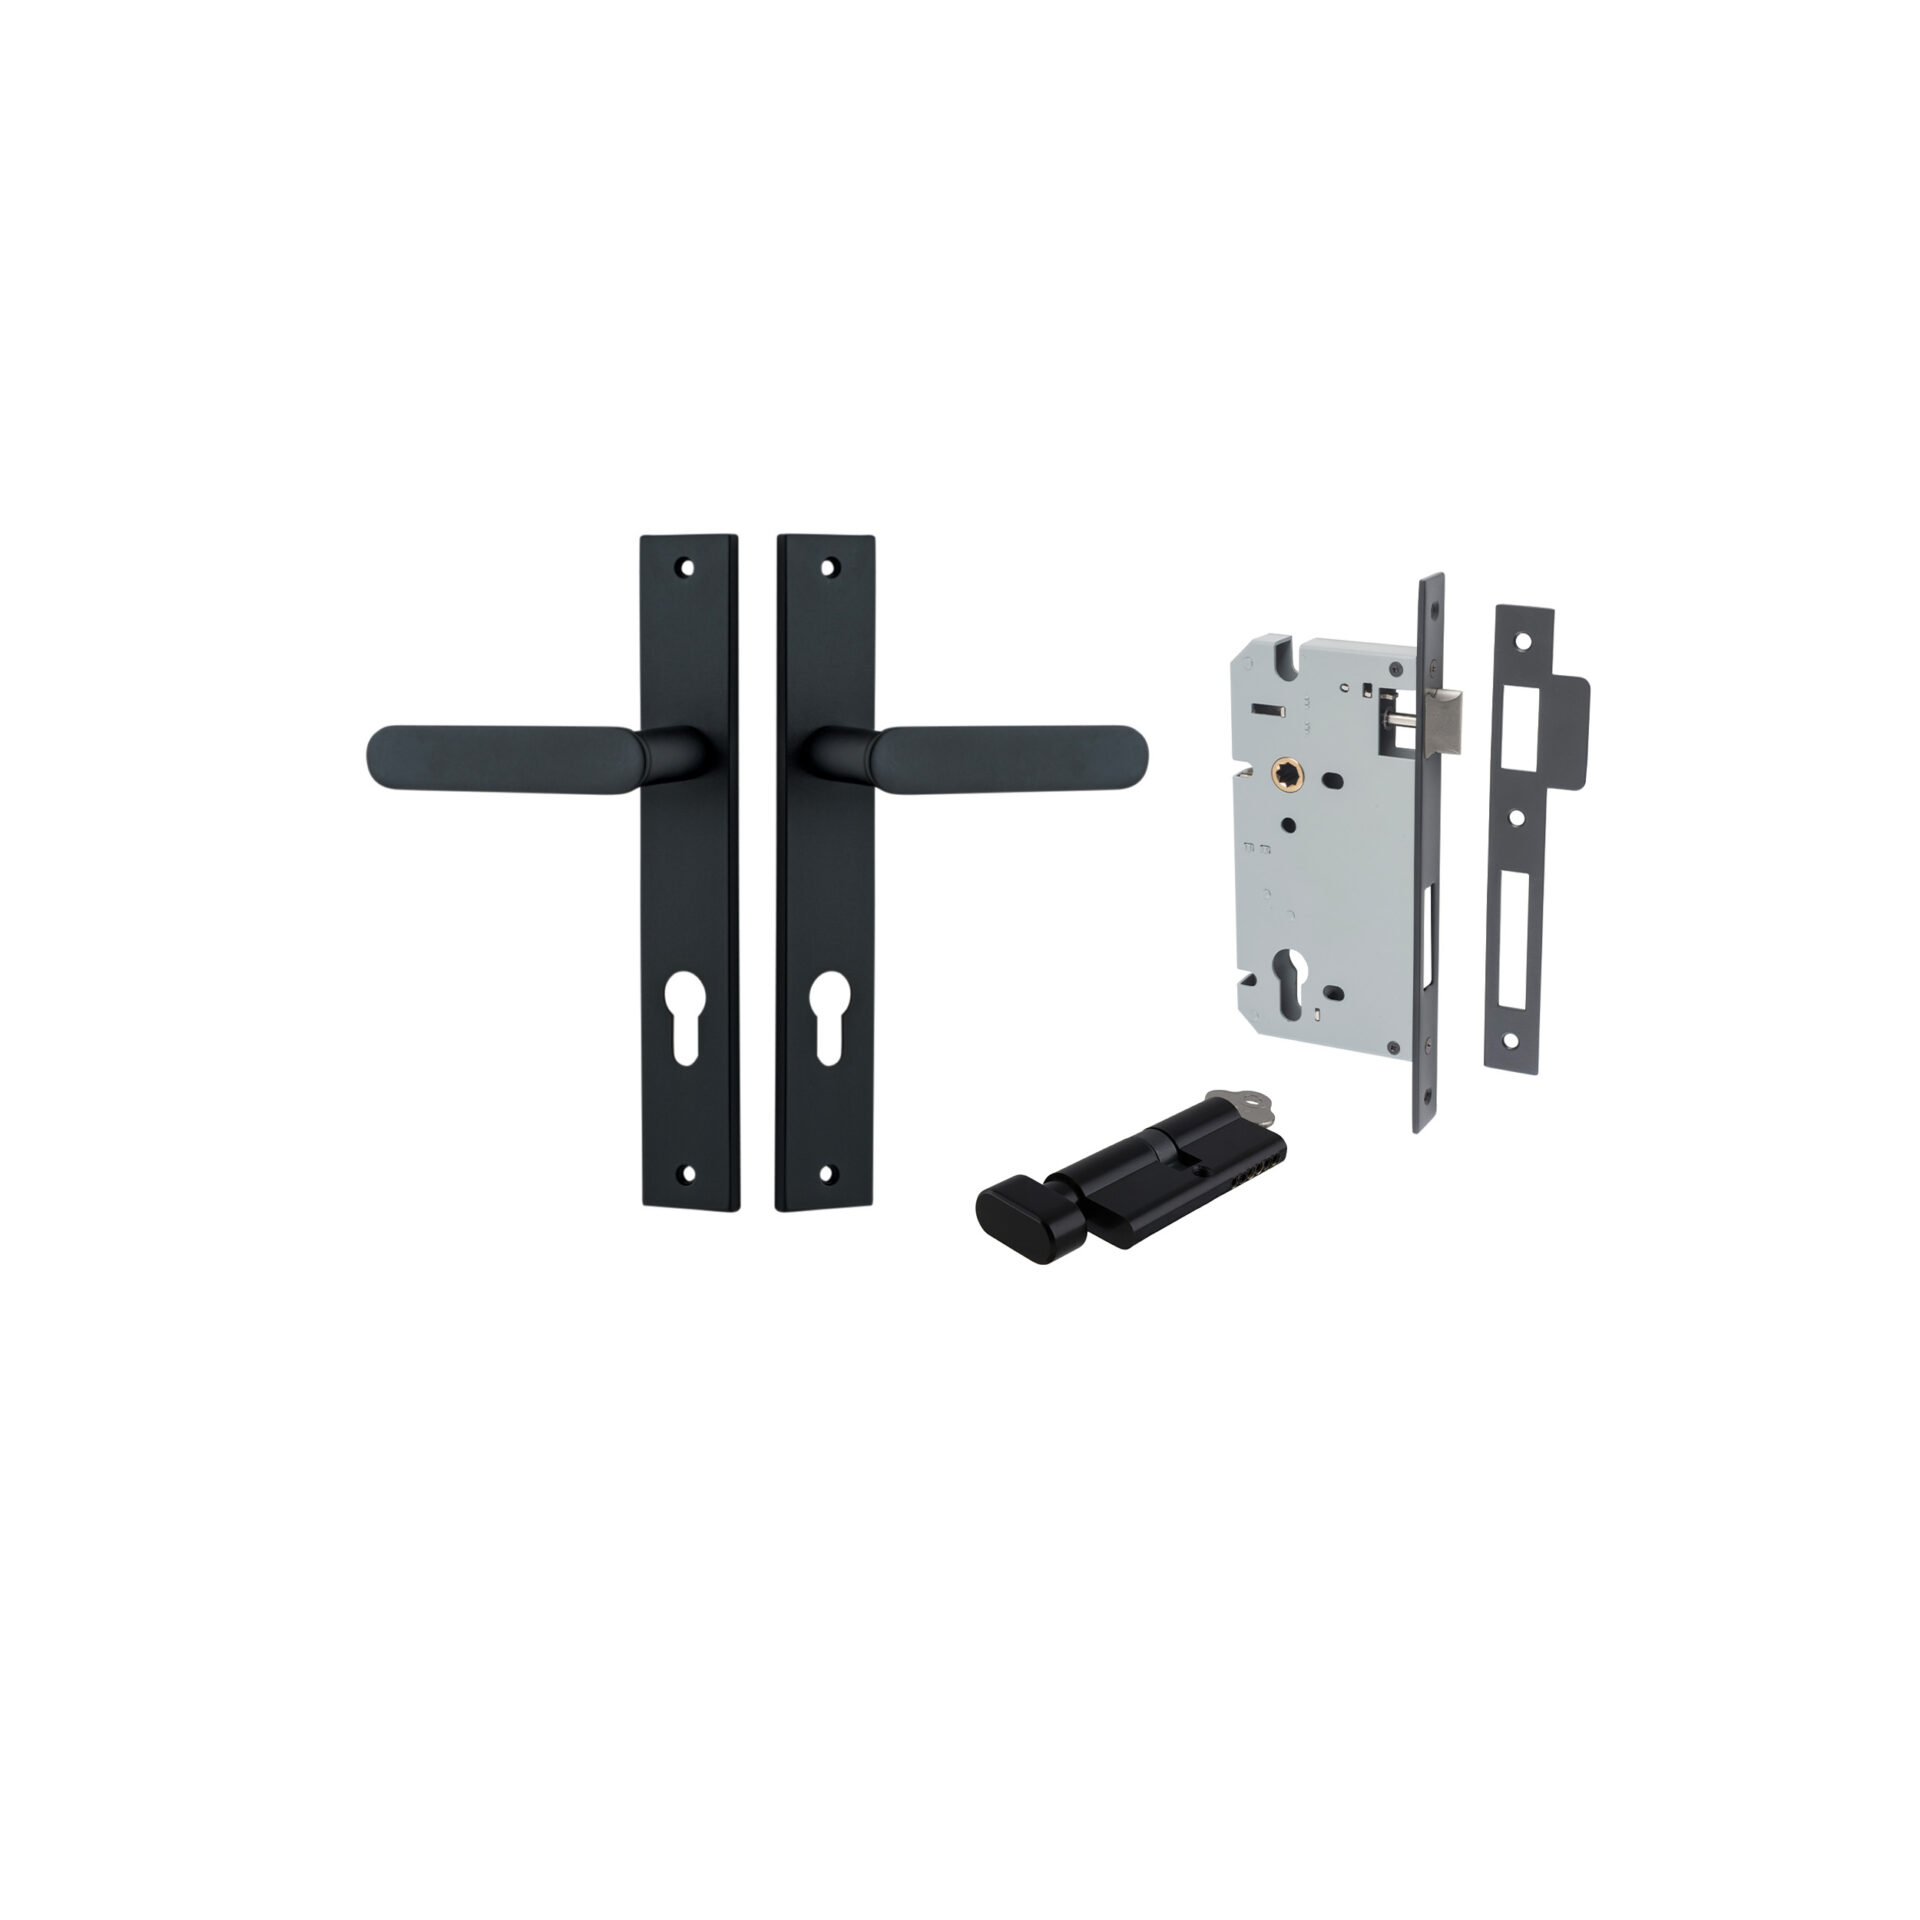 Bronte Lever - Rectangular Backplate Entrance Kit with High Security Lock